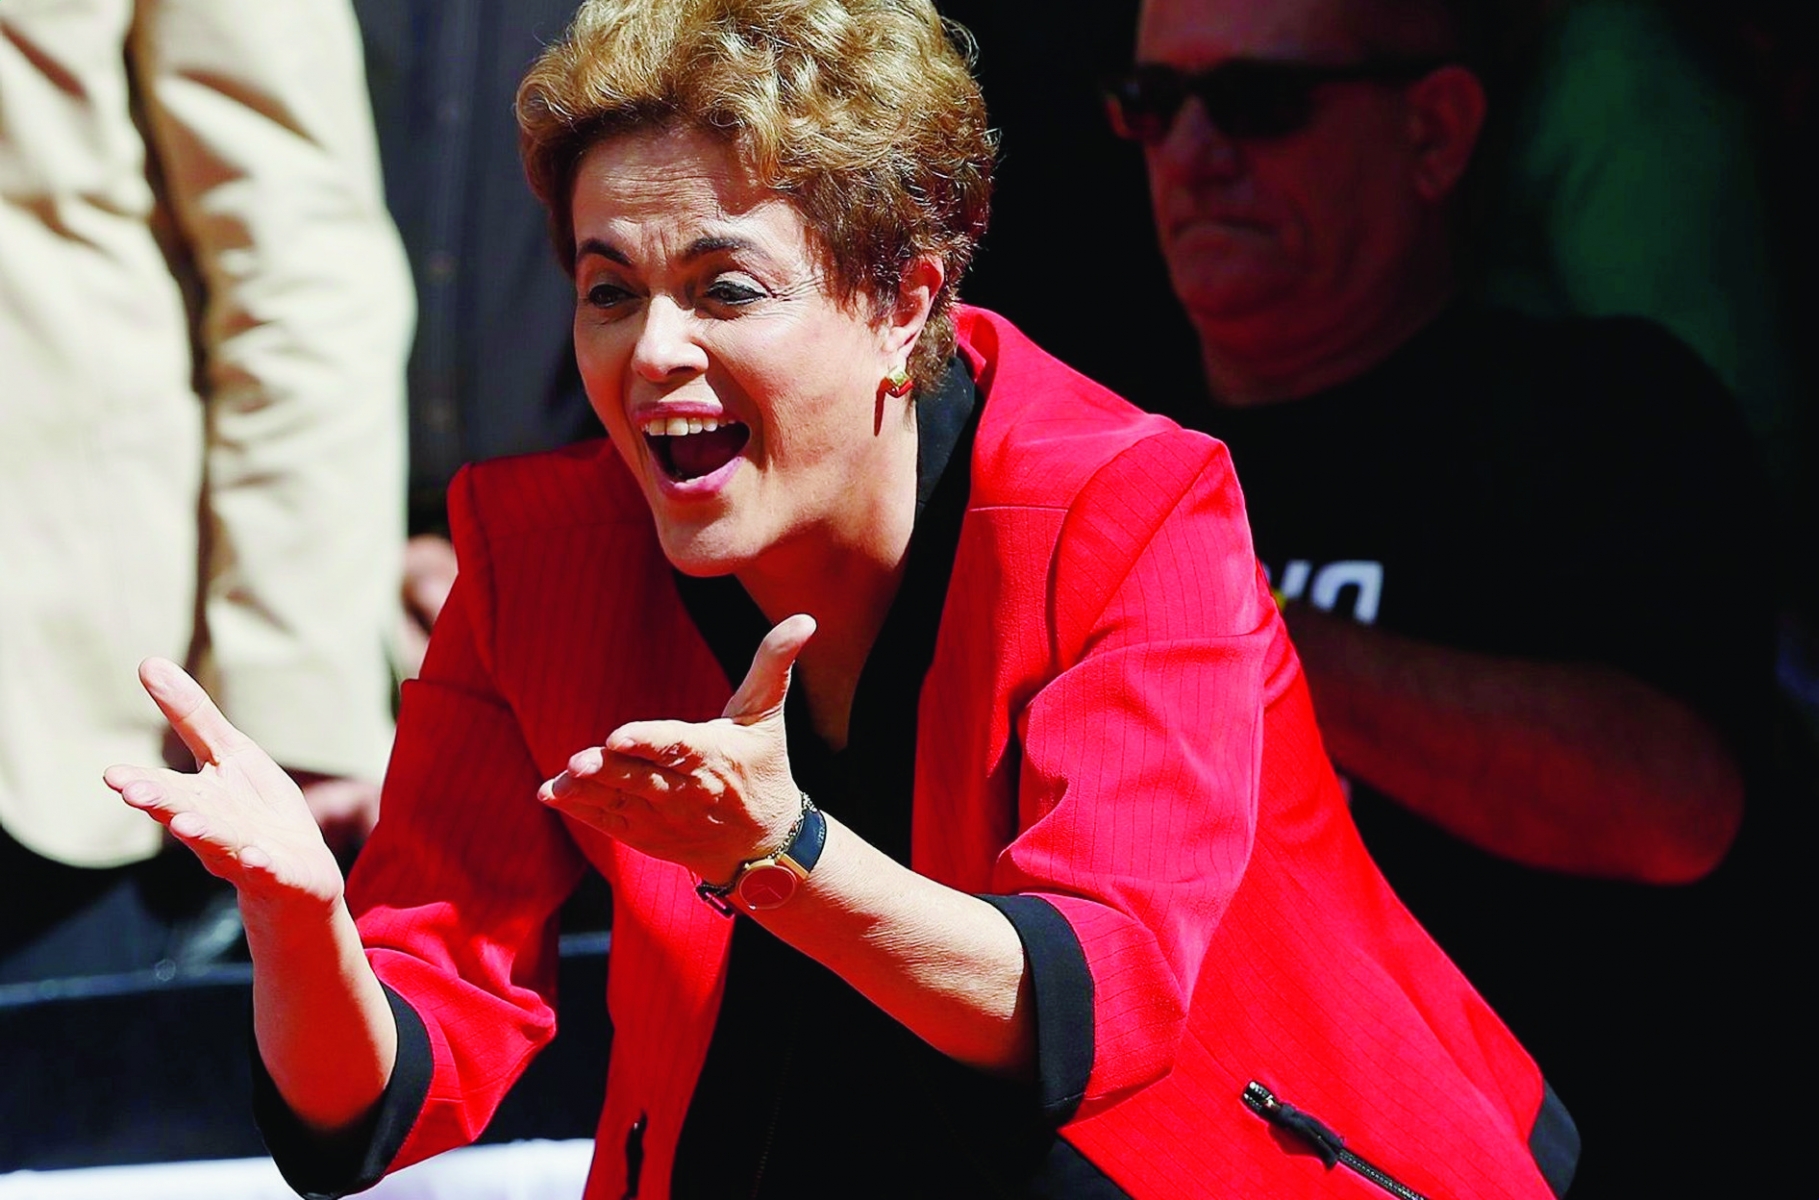 Brazil's President Dilma Rousseff blows kisses towards supporters during the May Day rally in Sao Paulo, Brazil, Sunday, May 1, 2016. President Rousseff is facing impeachment over allegations her administration violated fiscal laws. (AP Photo/Andre Penner) Brazil May Day